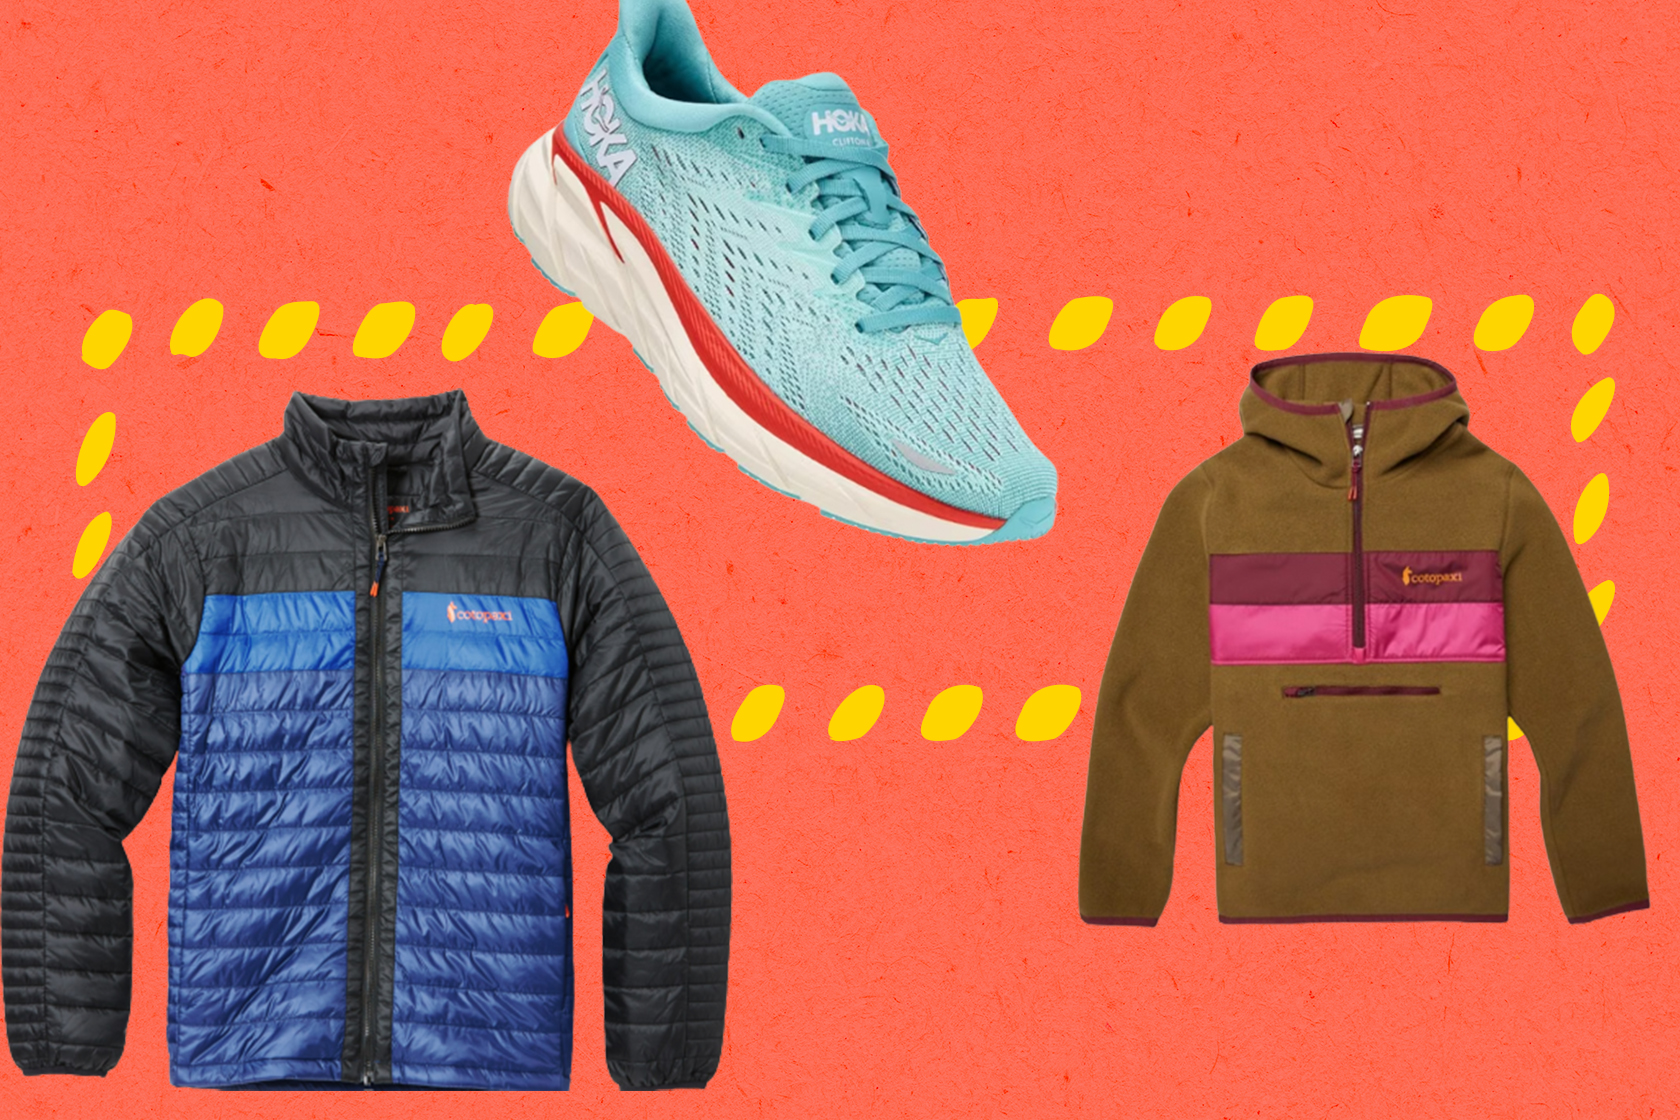 REI Clearnace: HOKA, Patagonia and more up to 50% off